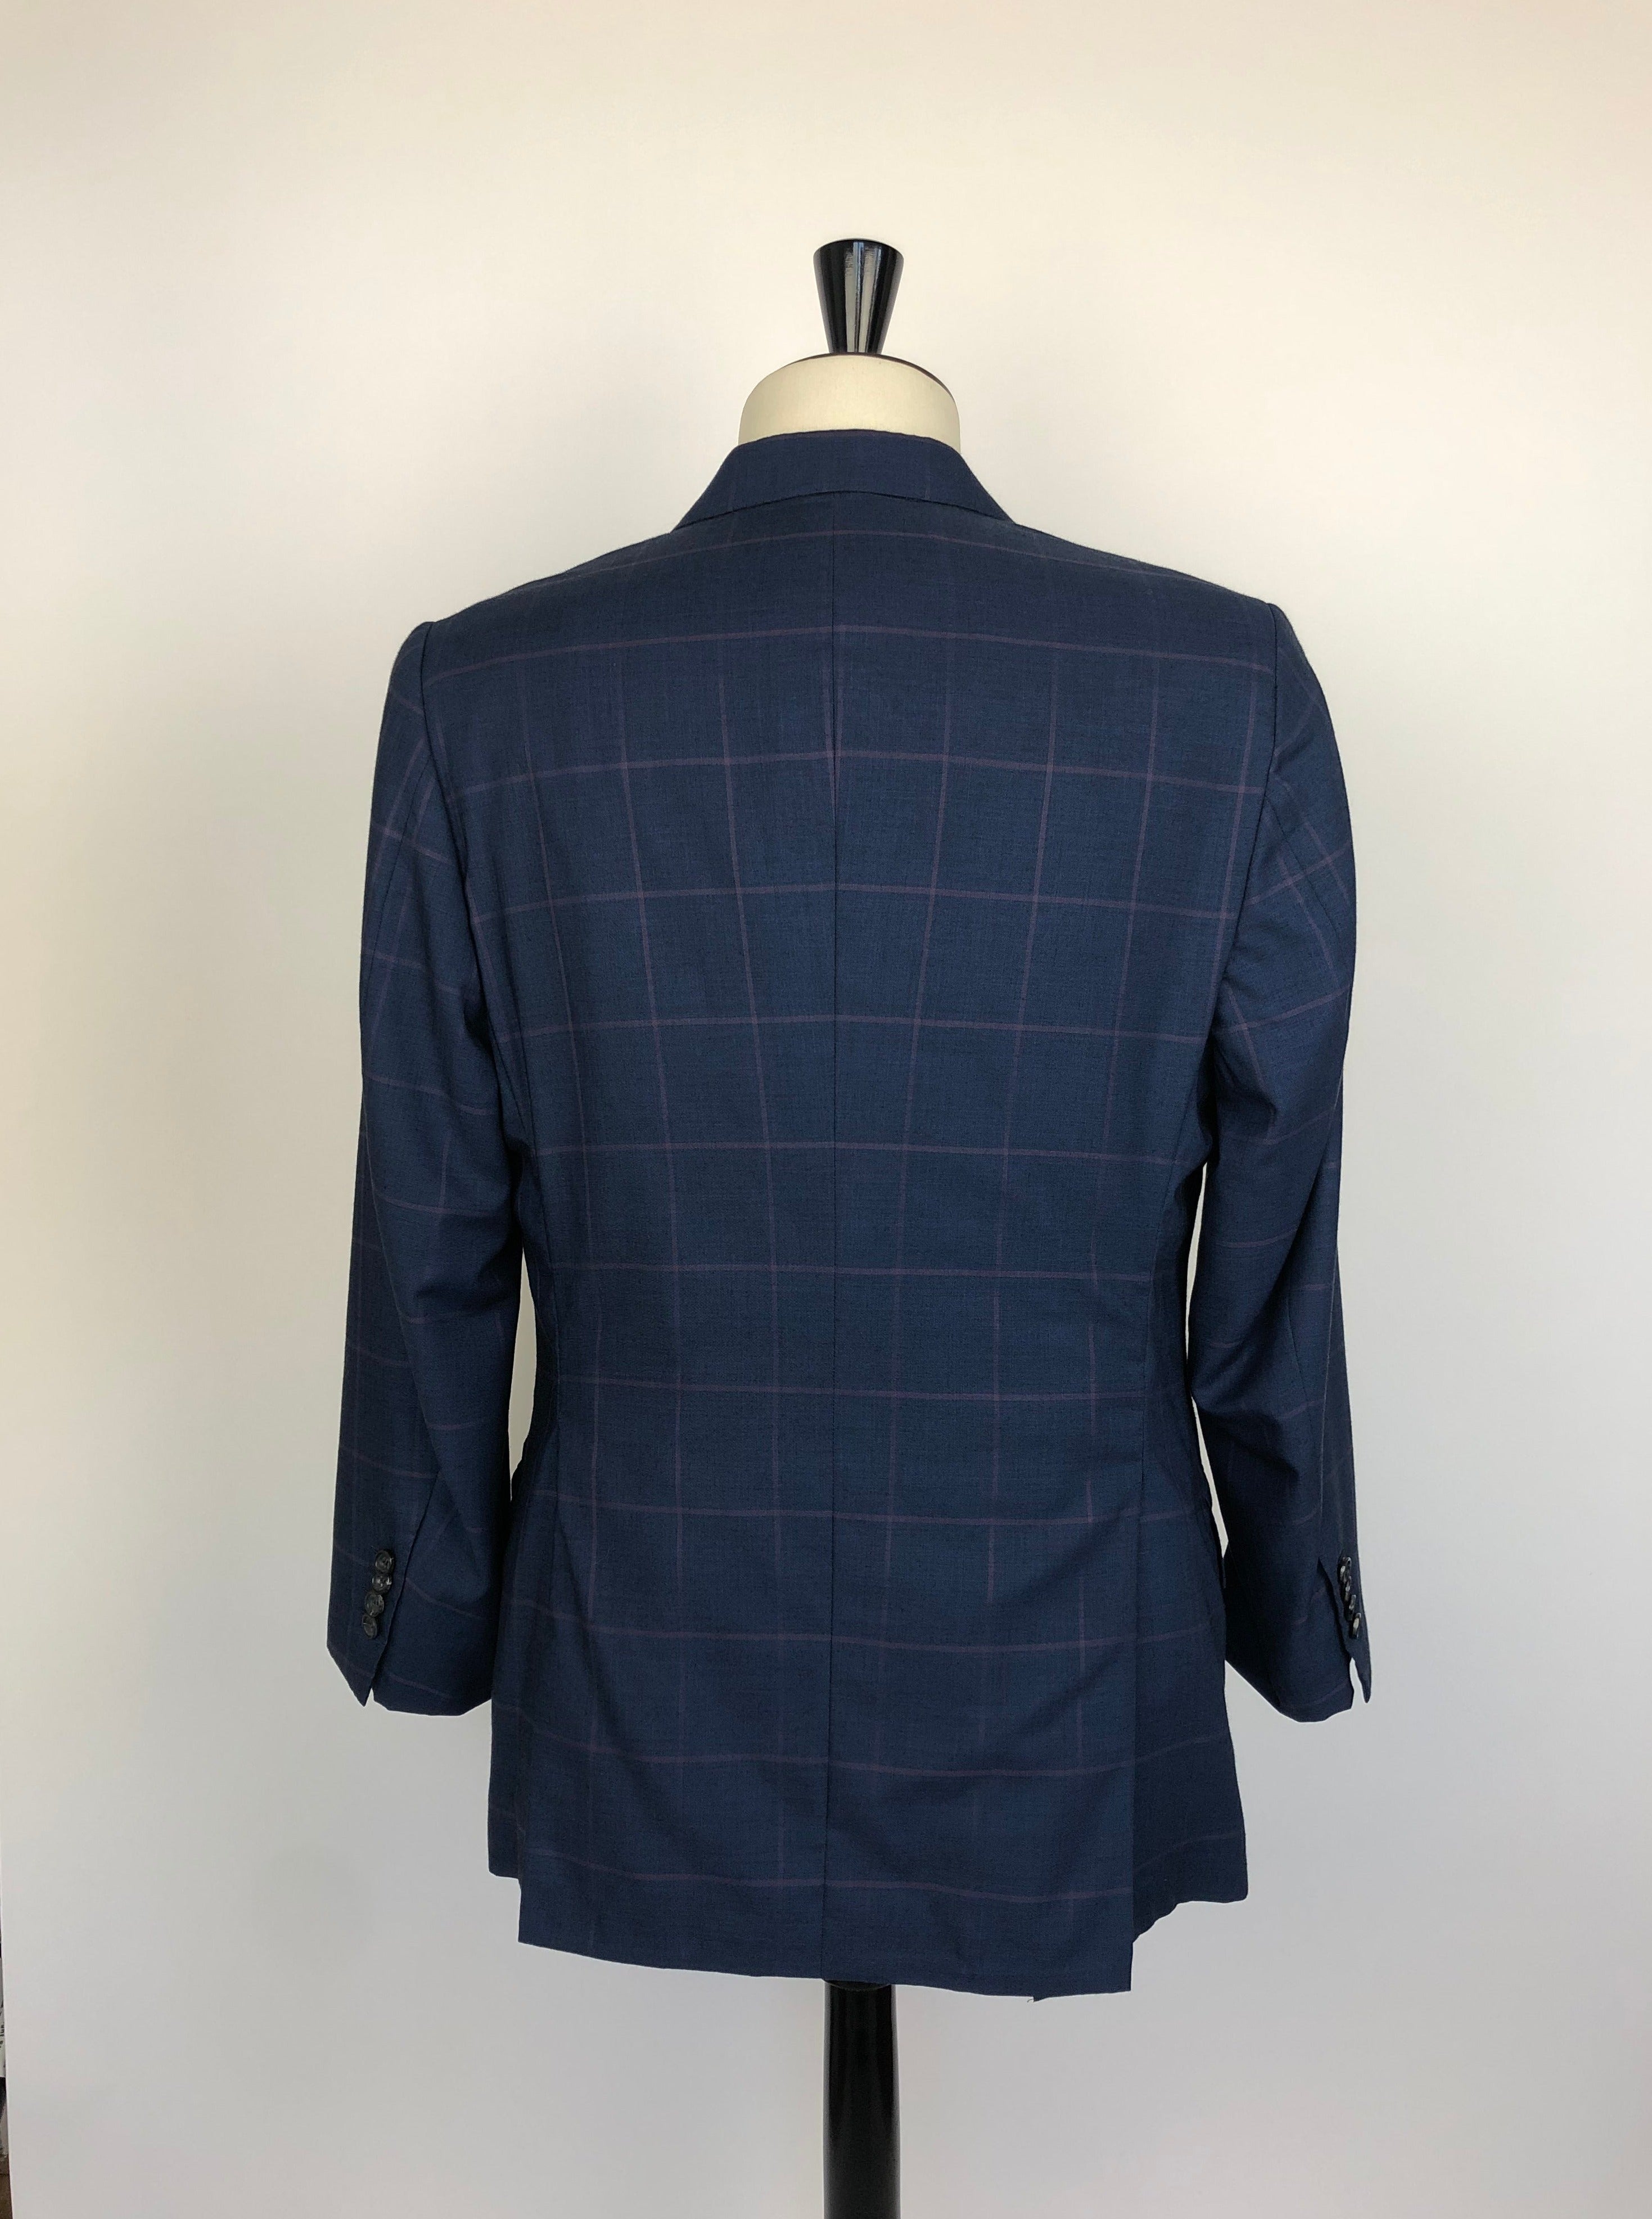 Kiton Double Breasted Cashmere Suit